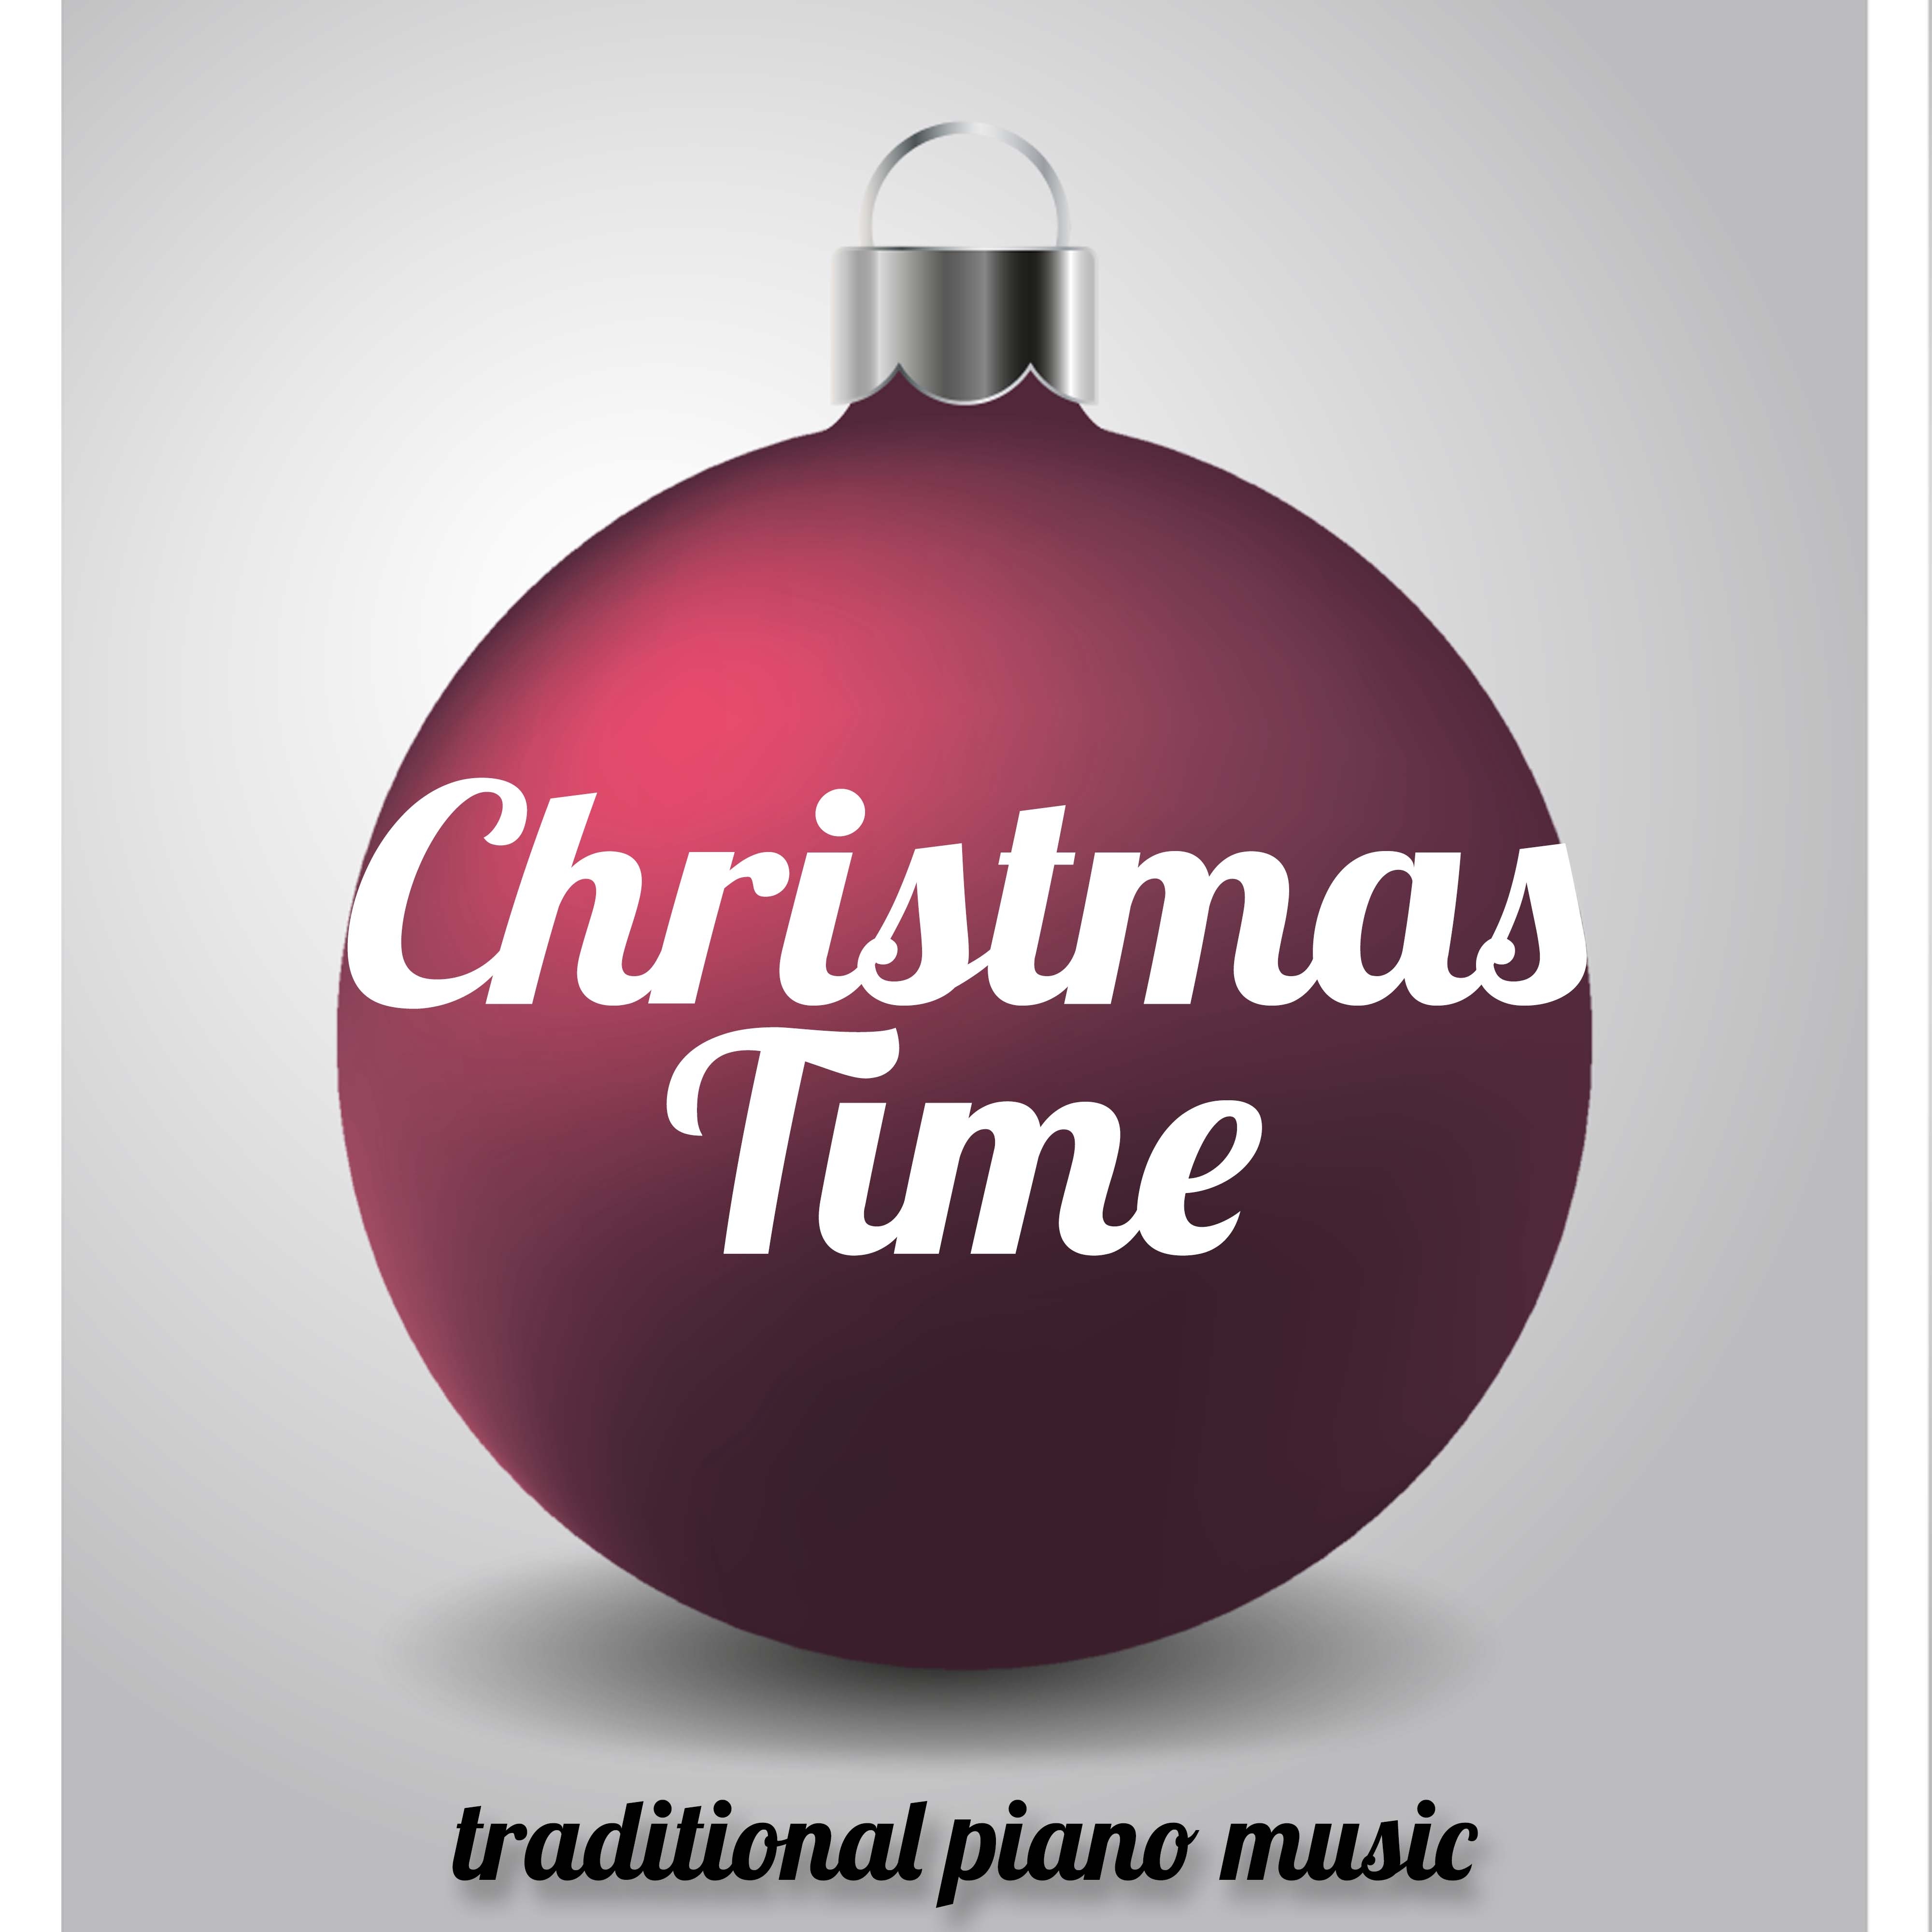 Christmas Time - Traditional Piano Music and New Age Relaxing Instrumental Music to Celebrate Christmas with your Friends and Family